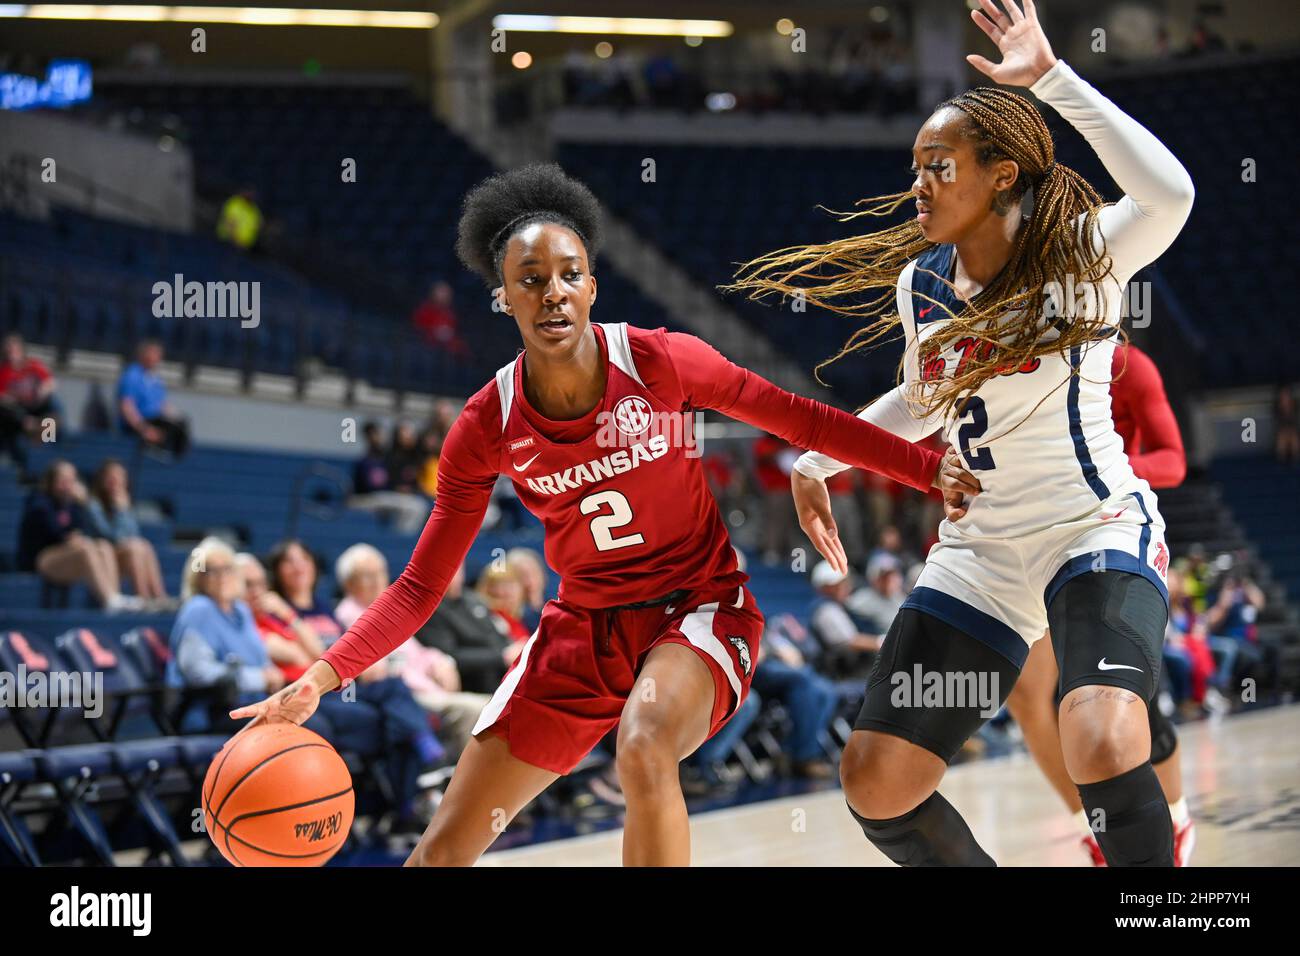 Oxford, MS, USA. 22nd Feb, 2022. Arkansas guard Samara Spencer (2) drives against Ole' Miss guard Mimi Reid (2) during the college basketball game between the Arkansas Razorbacks and the Ole' Miss Rebels on February 22, 2022 at the SJB Pavilion in Oxford, MS. (Photo by: Kevin Langley/CSM). Credit: csm/Alamy Live News Stock Photo